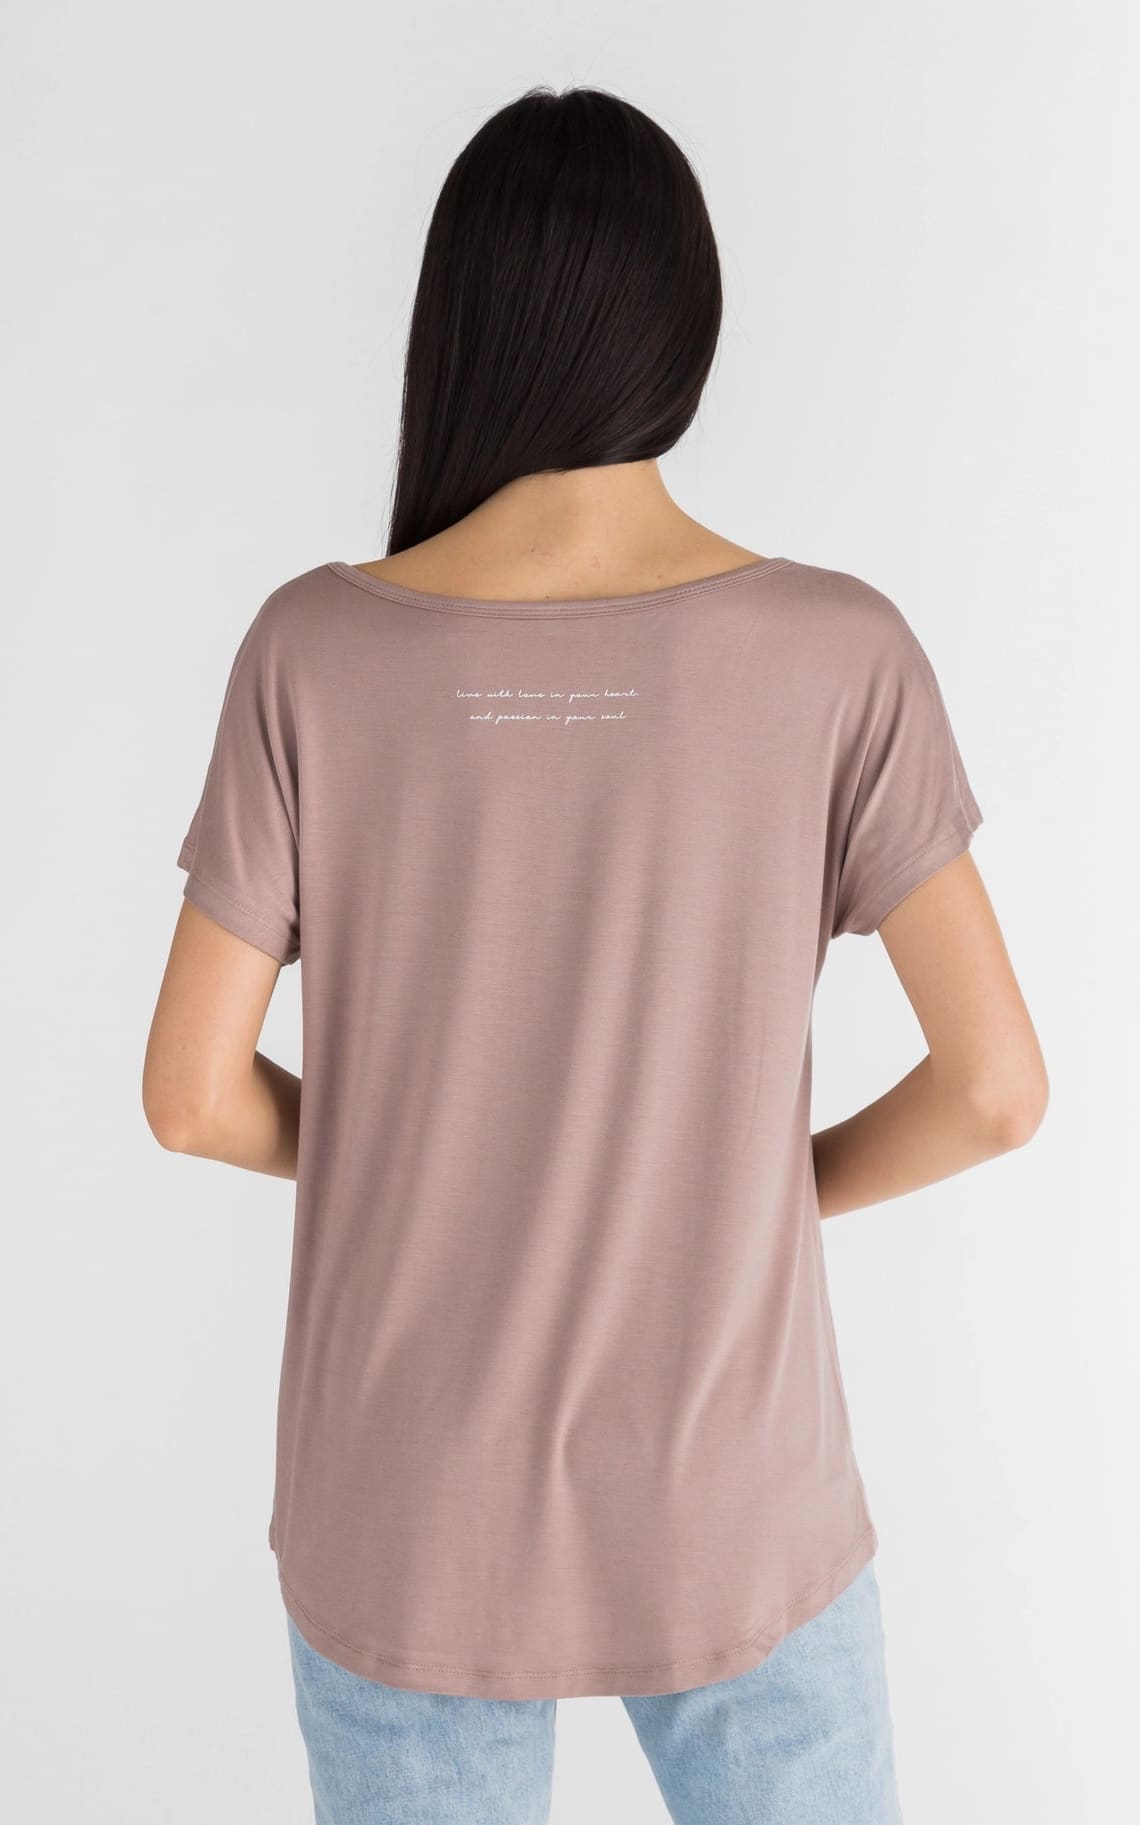 The Roster - Live With Love Scoop Neck Tee in Himalayan Salt